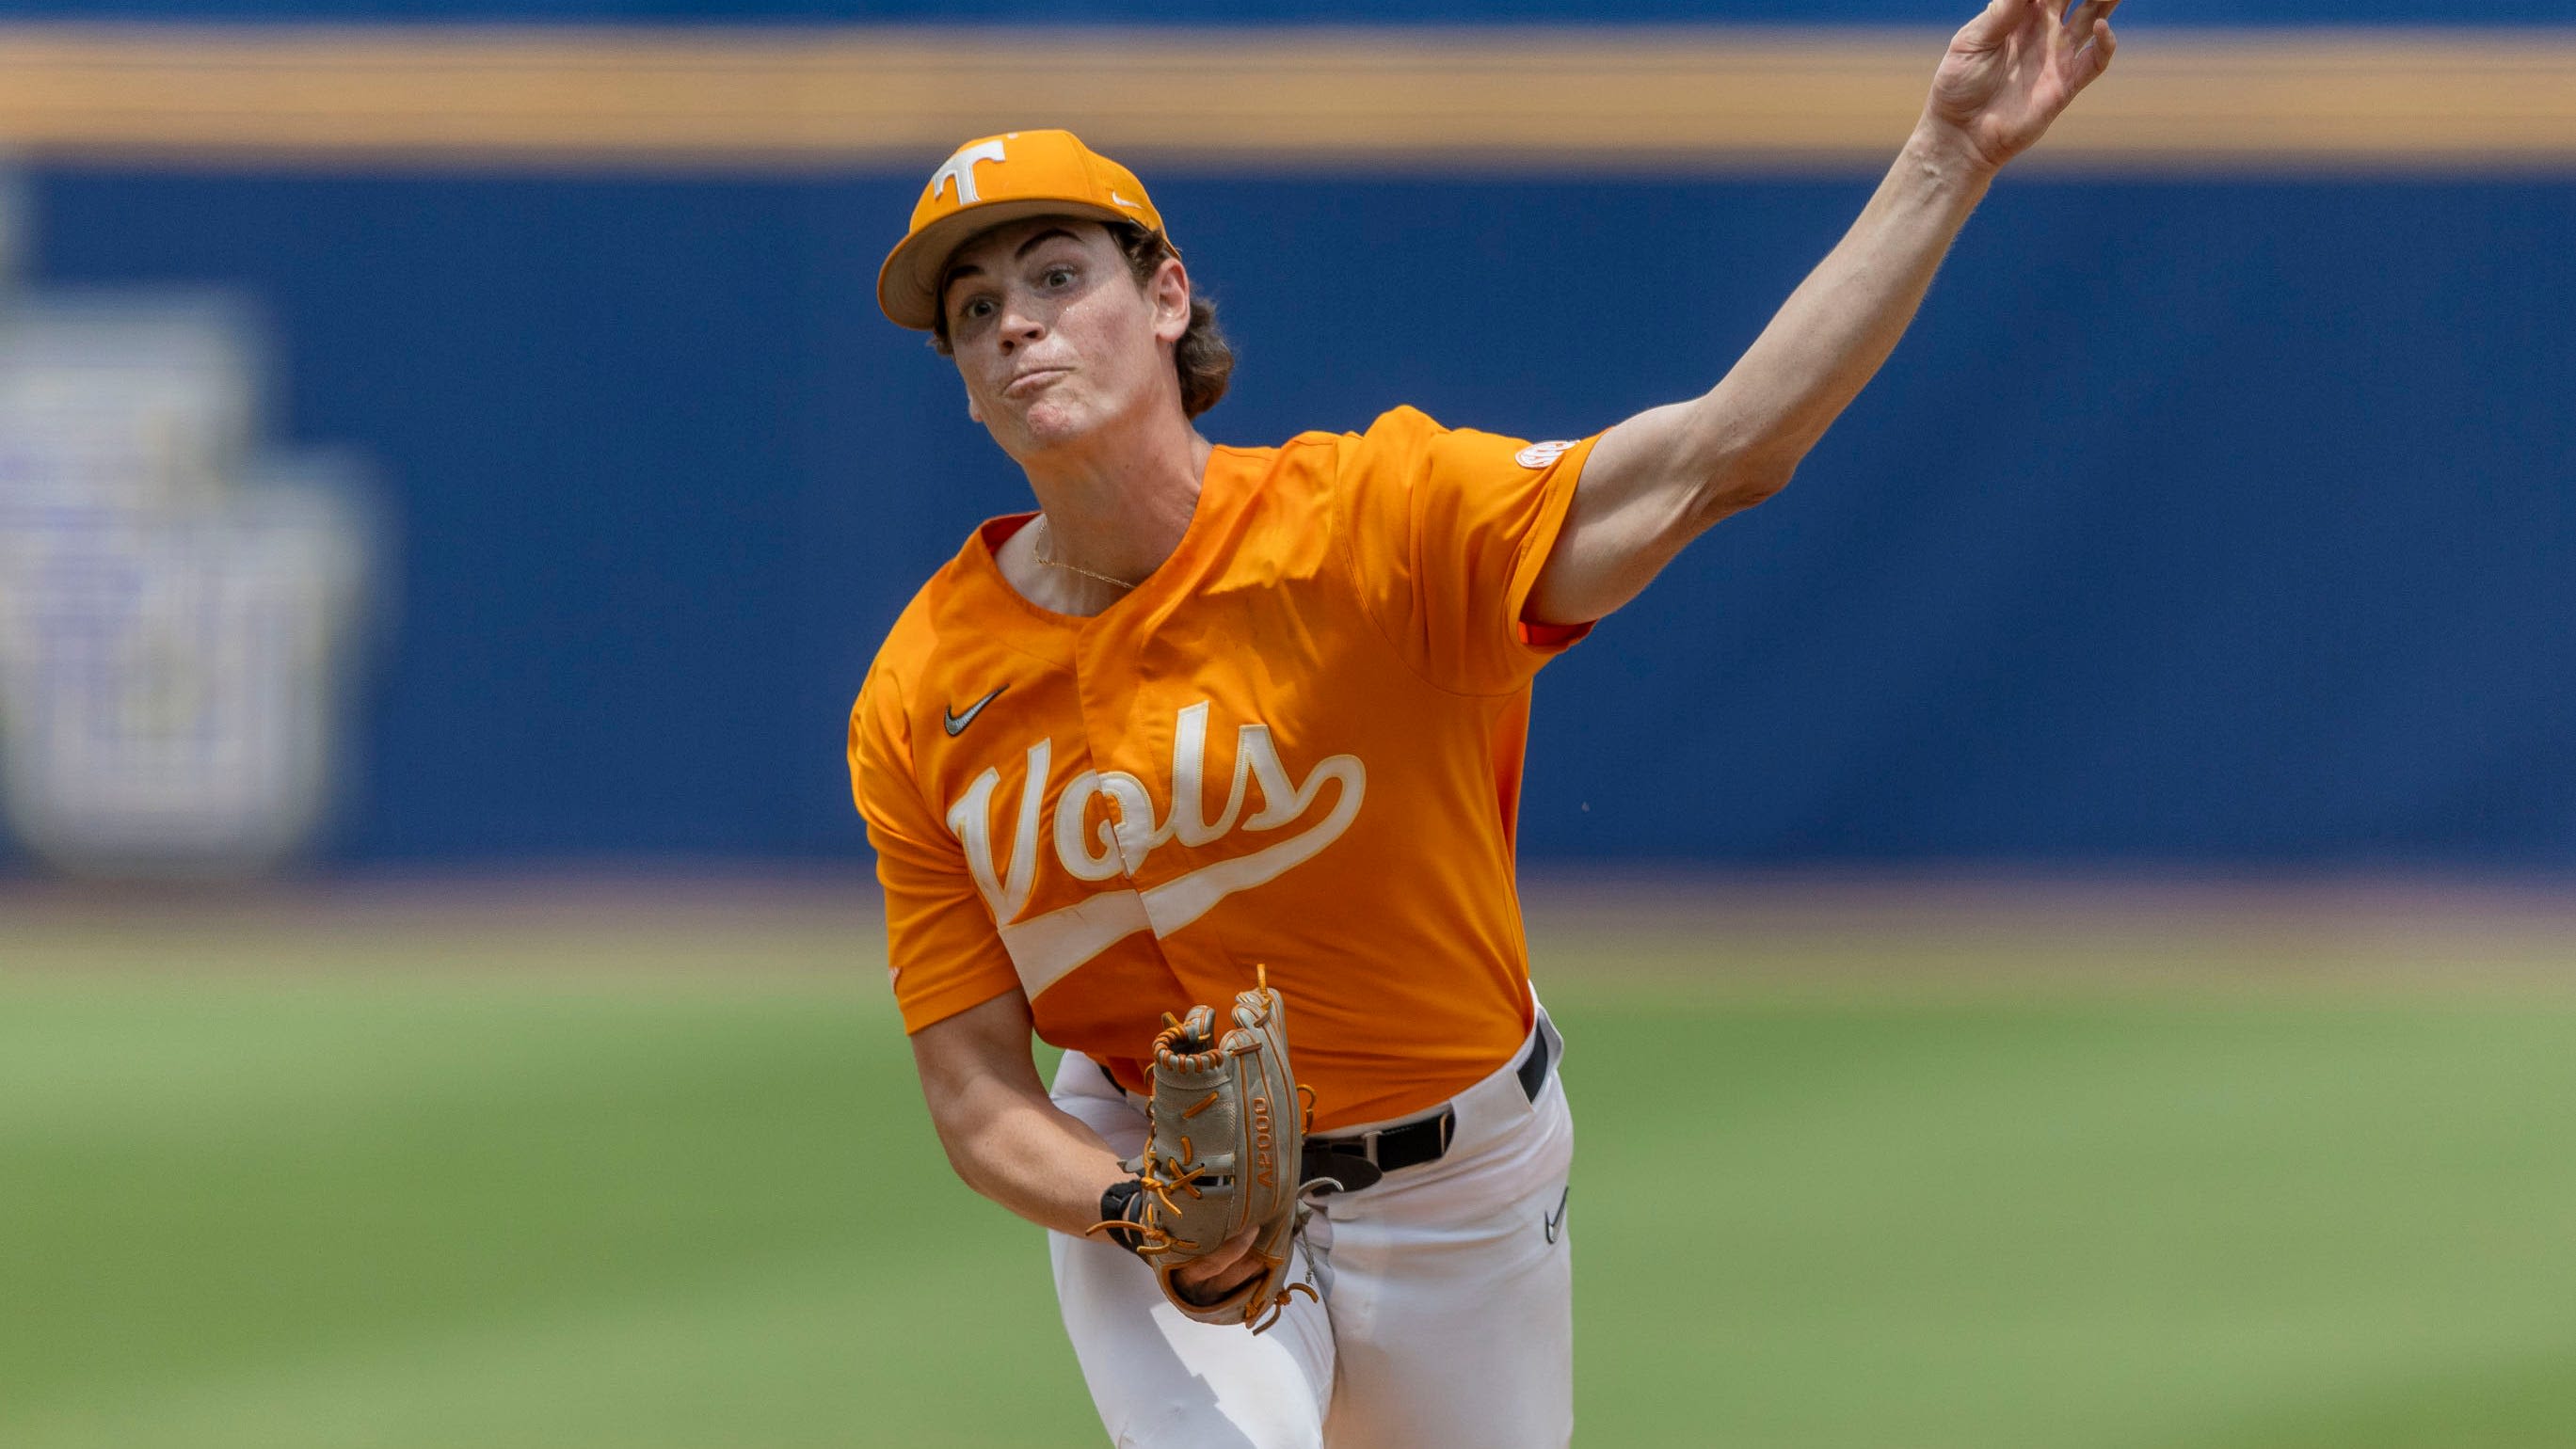 Chris Stamos' best outing for Tennessee baseball gives Vols reset they needed at SEC Tournament